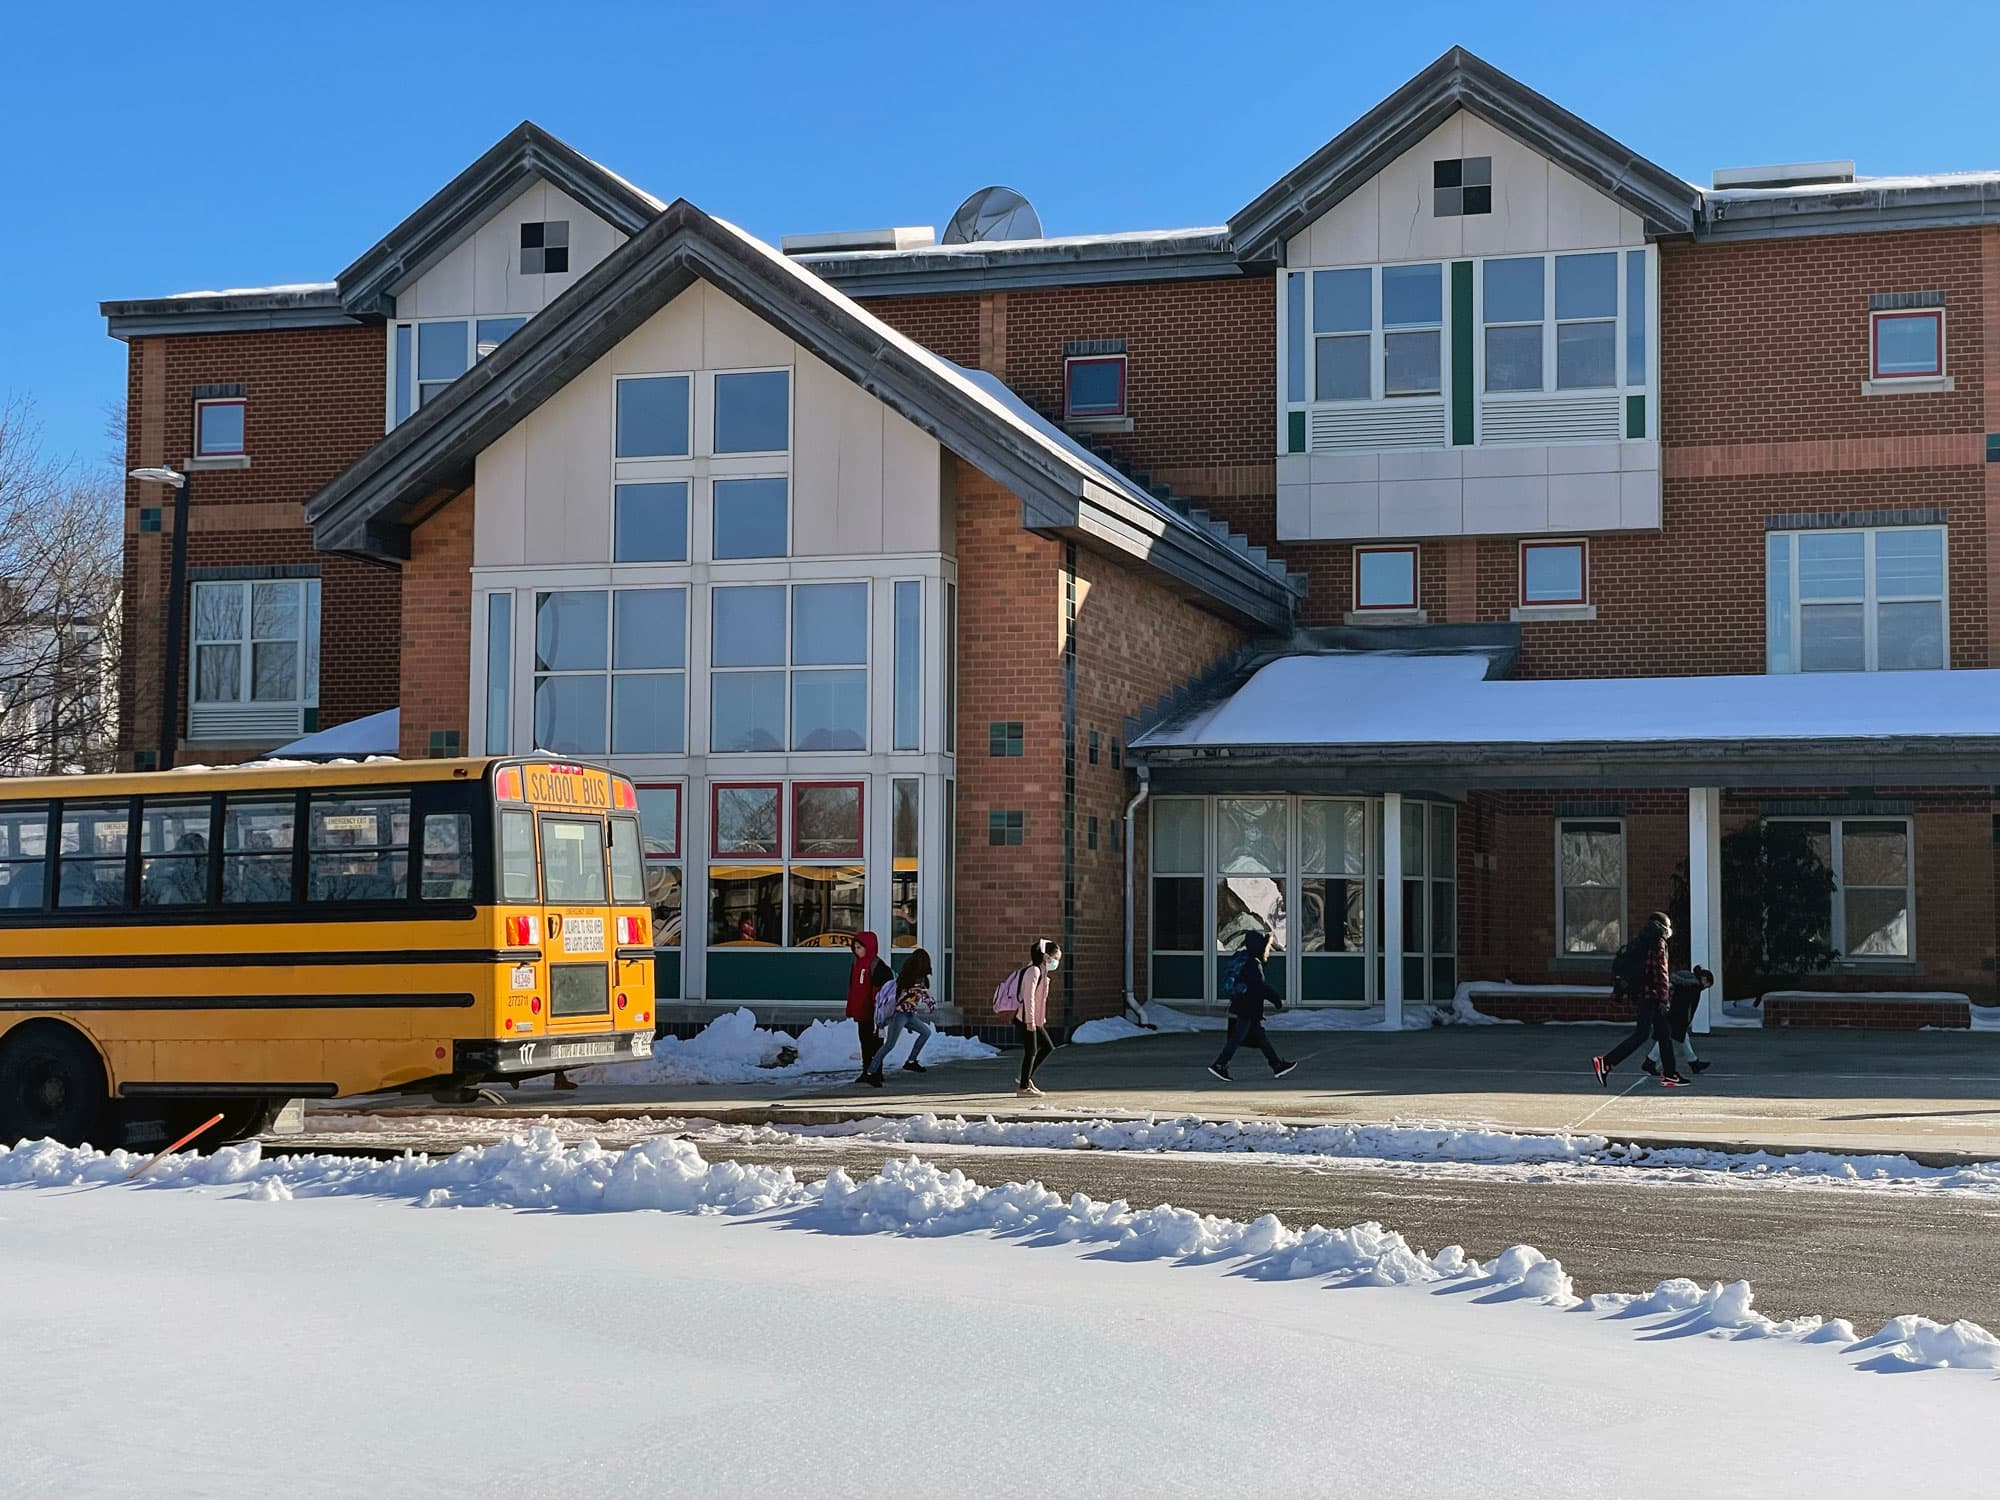 Students disembark from the bus on the first day without mandatory masking in Haverhill schools. (Max Larkin/WBUR)